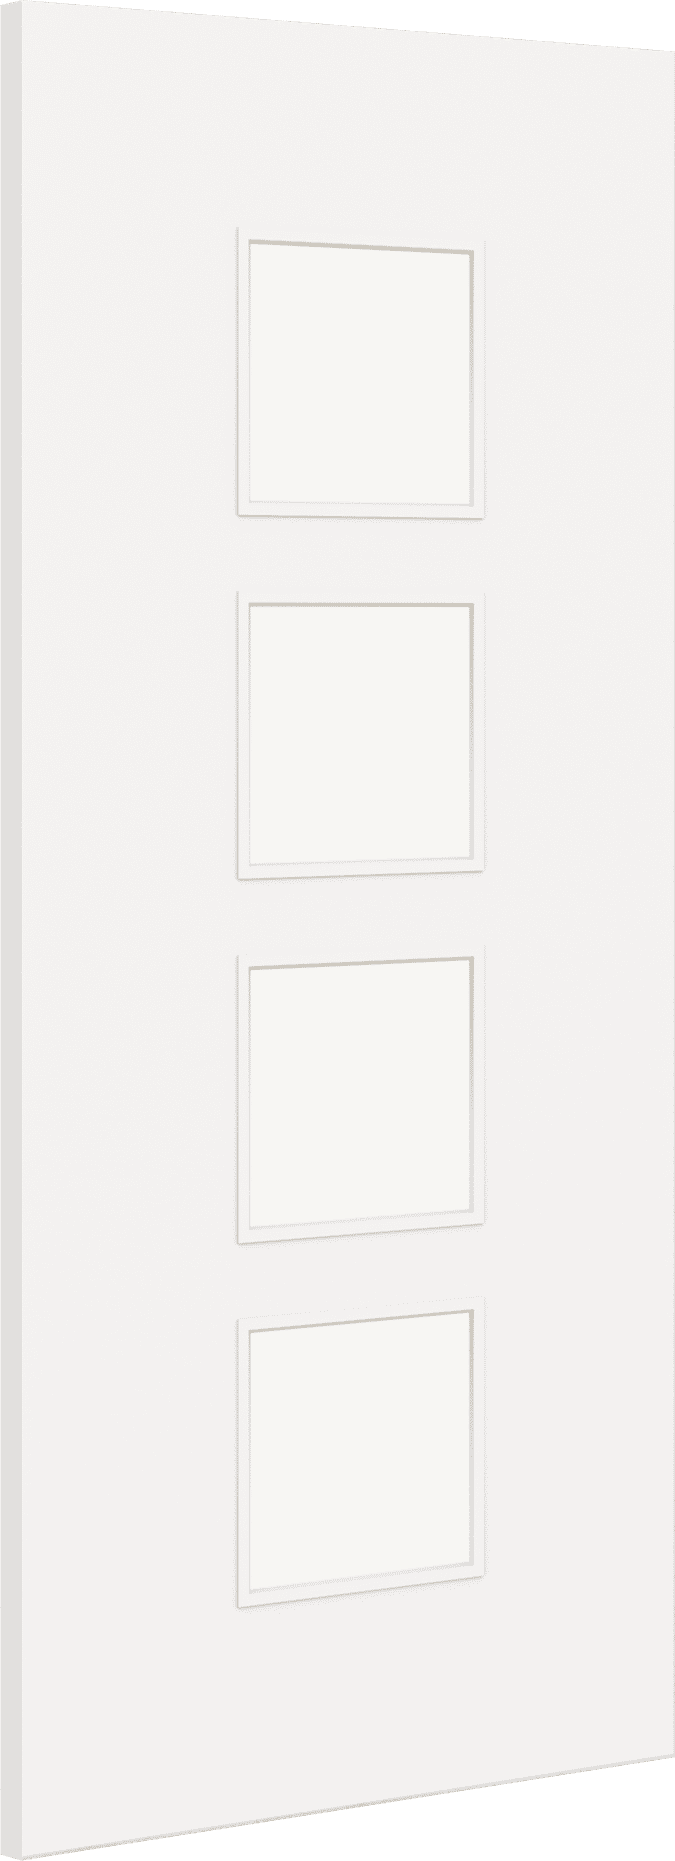 1981mm x 762mm x 44mm (30") Architectural Paint Grade White 09 Frosted Glazed Fire Door Blank